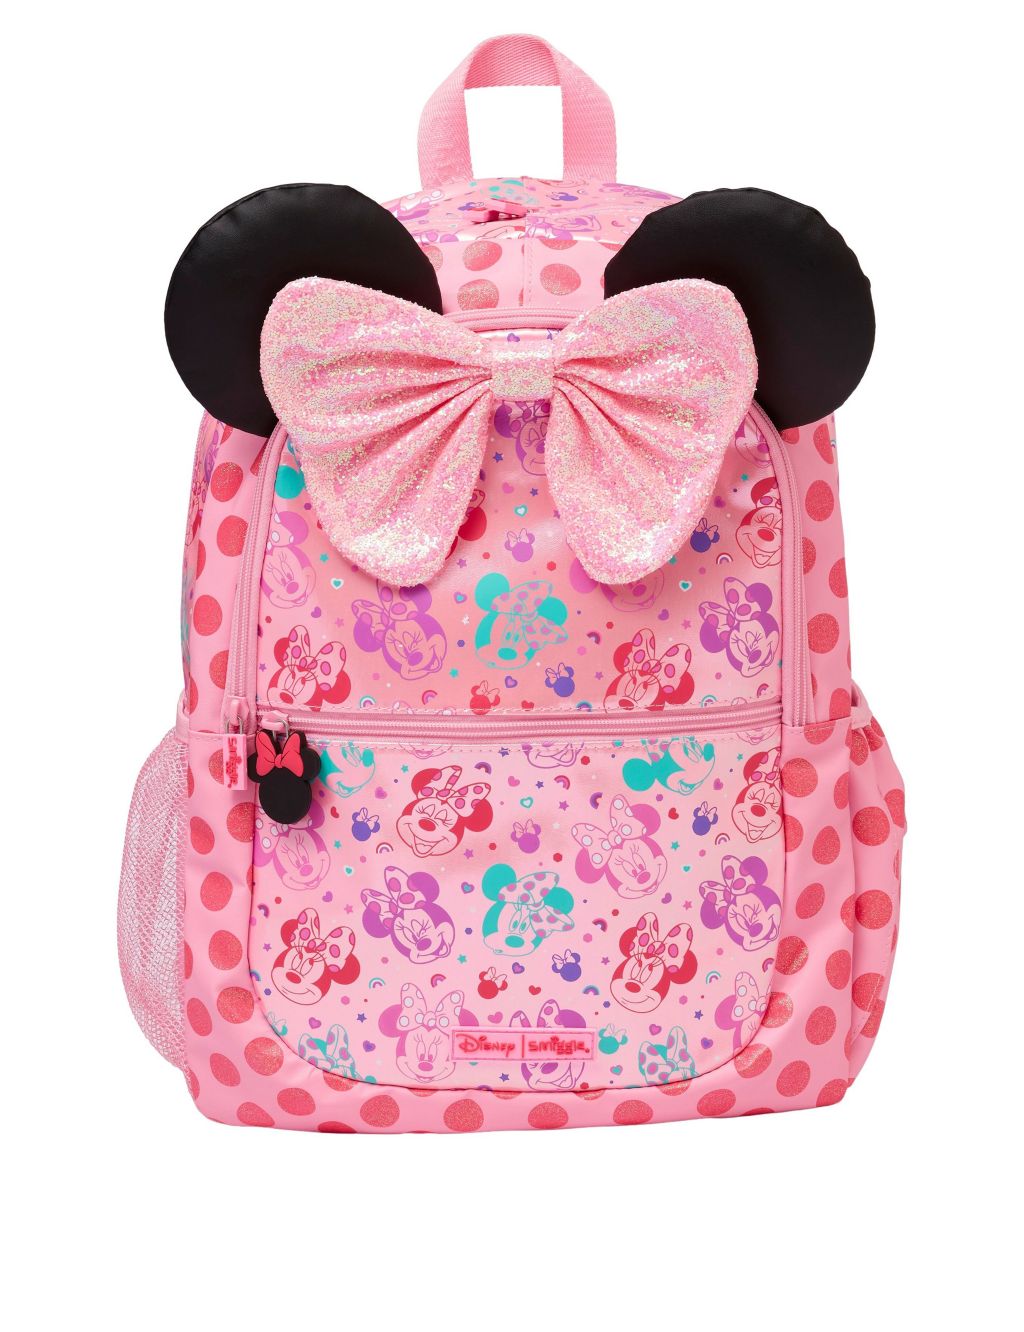 Kids' Minnie Mouse™ Backpack image 1